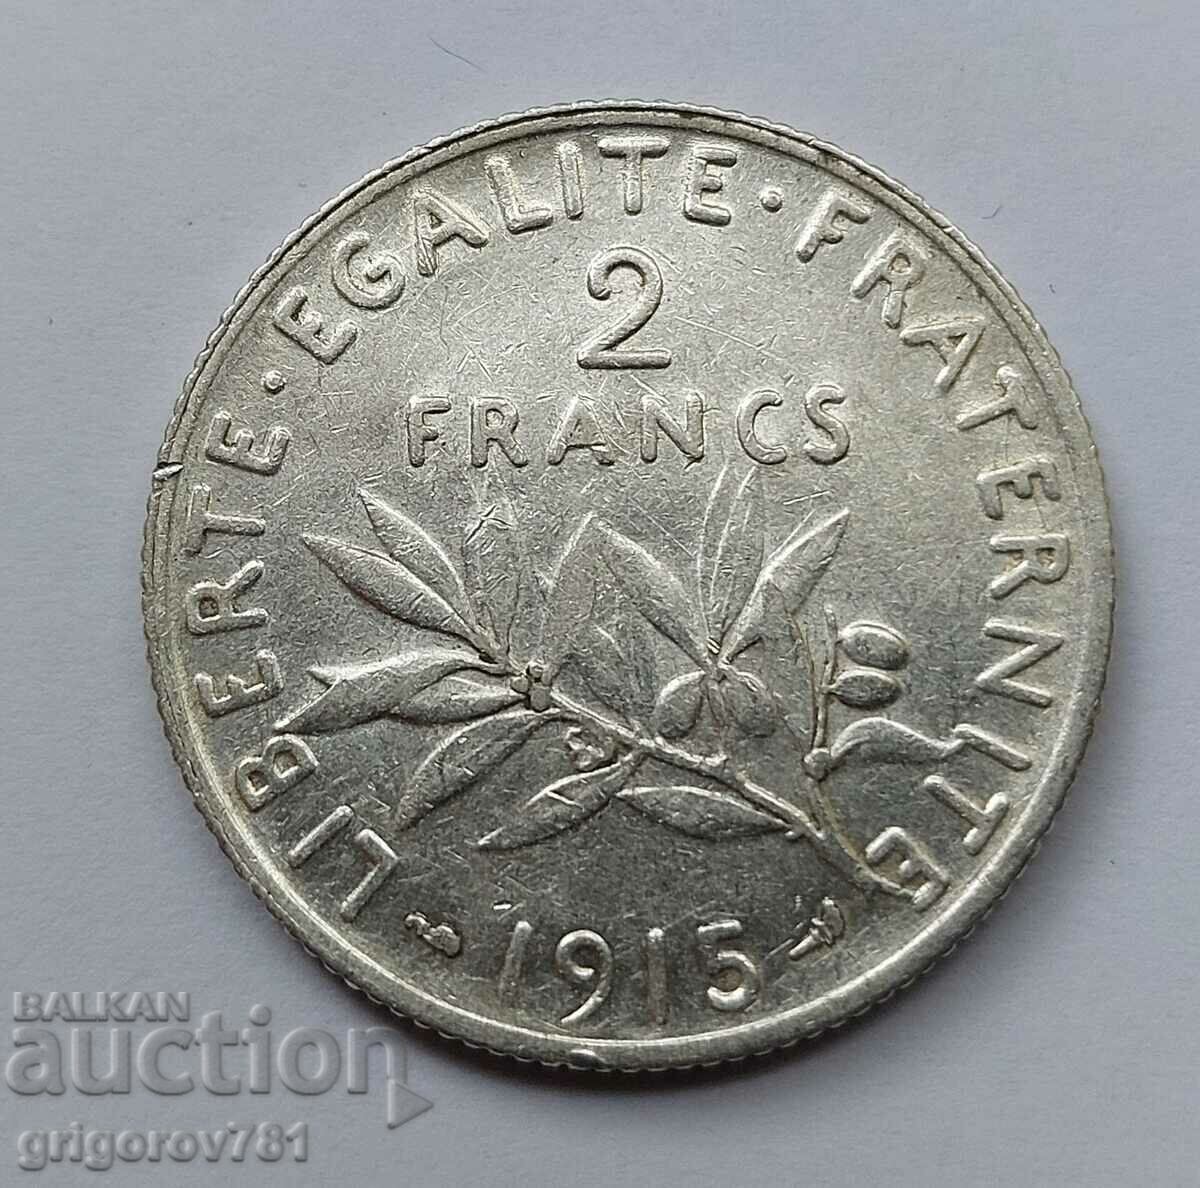 2 Francs Silver France 1915 - Silver Coin #71